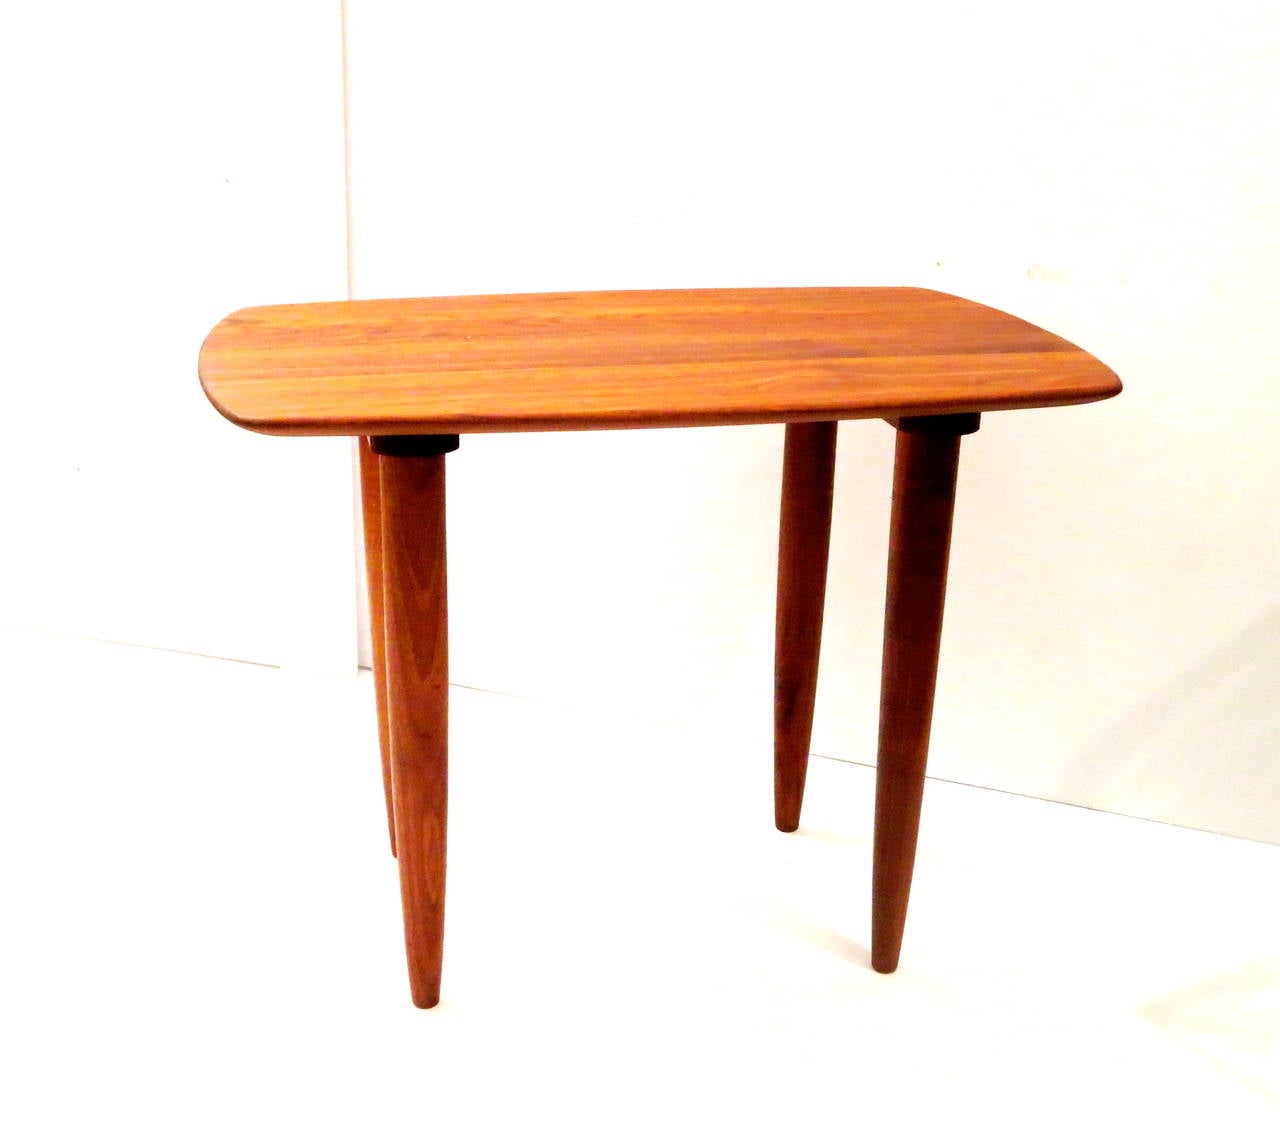 Walnut American Modern pair of solid walnut end tables by Ace-Hi of California